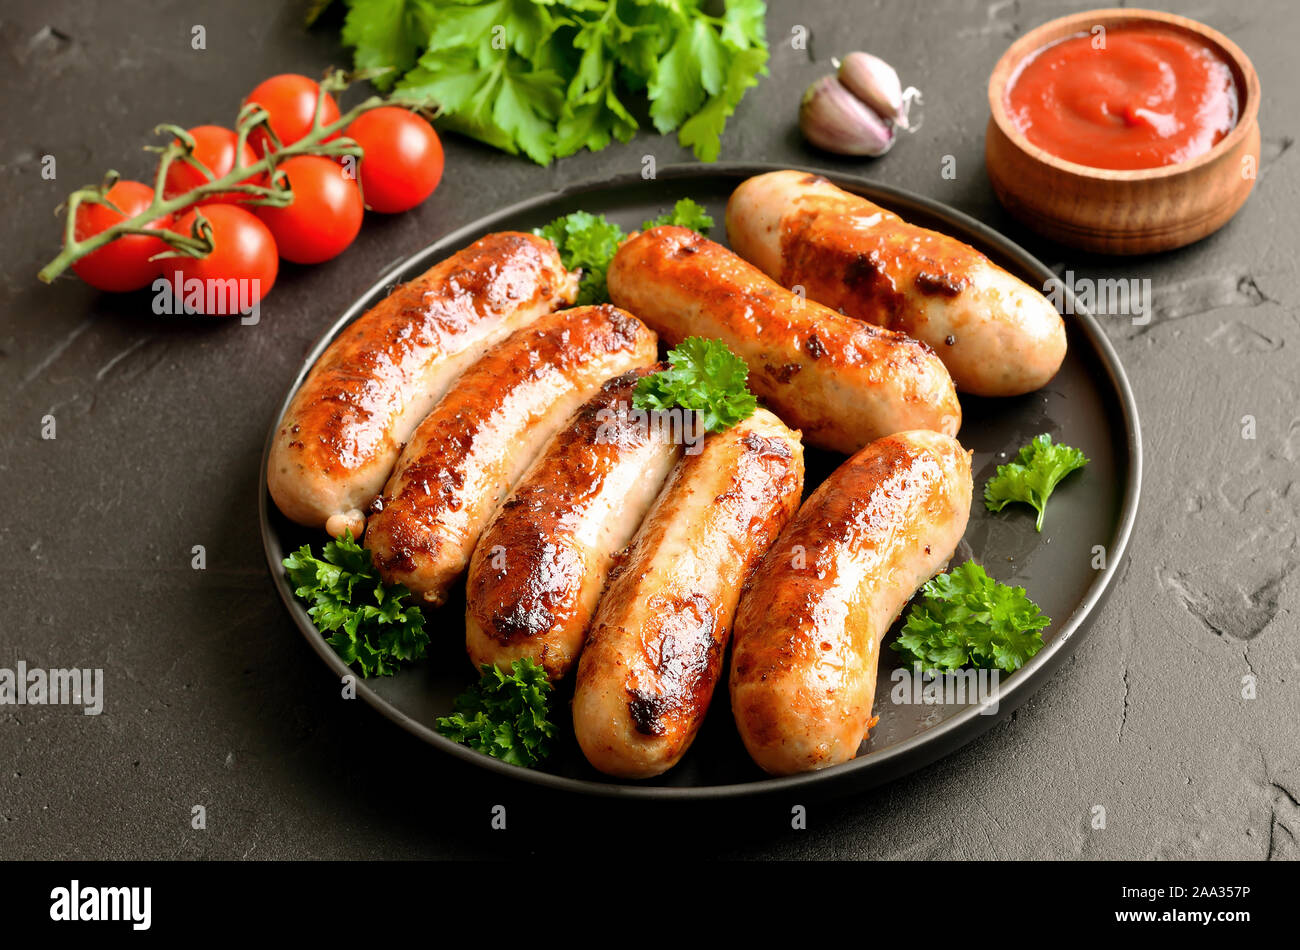 Barbecue sausage with fresh parsley on plate, fresh tomatoes and garlic on table Stock Photo